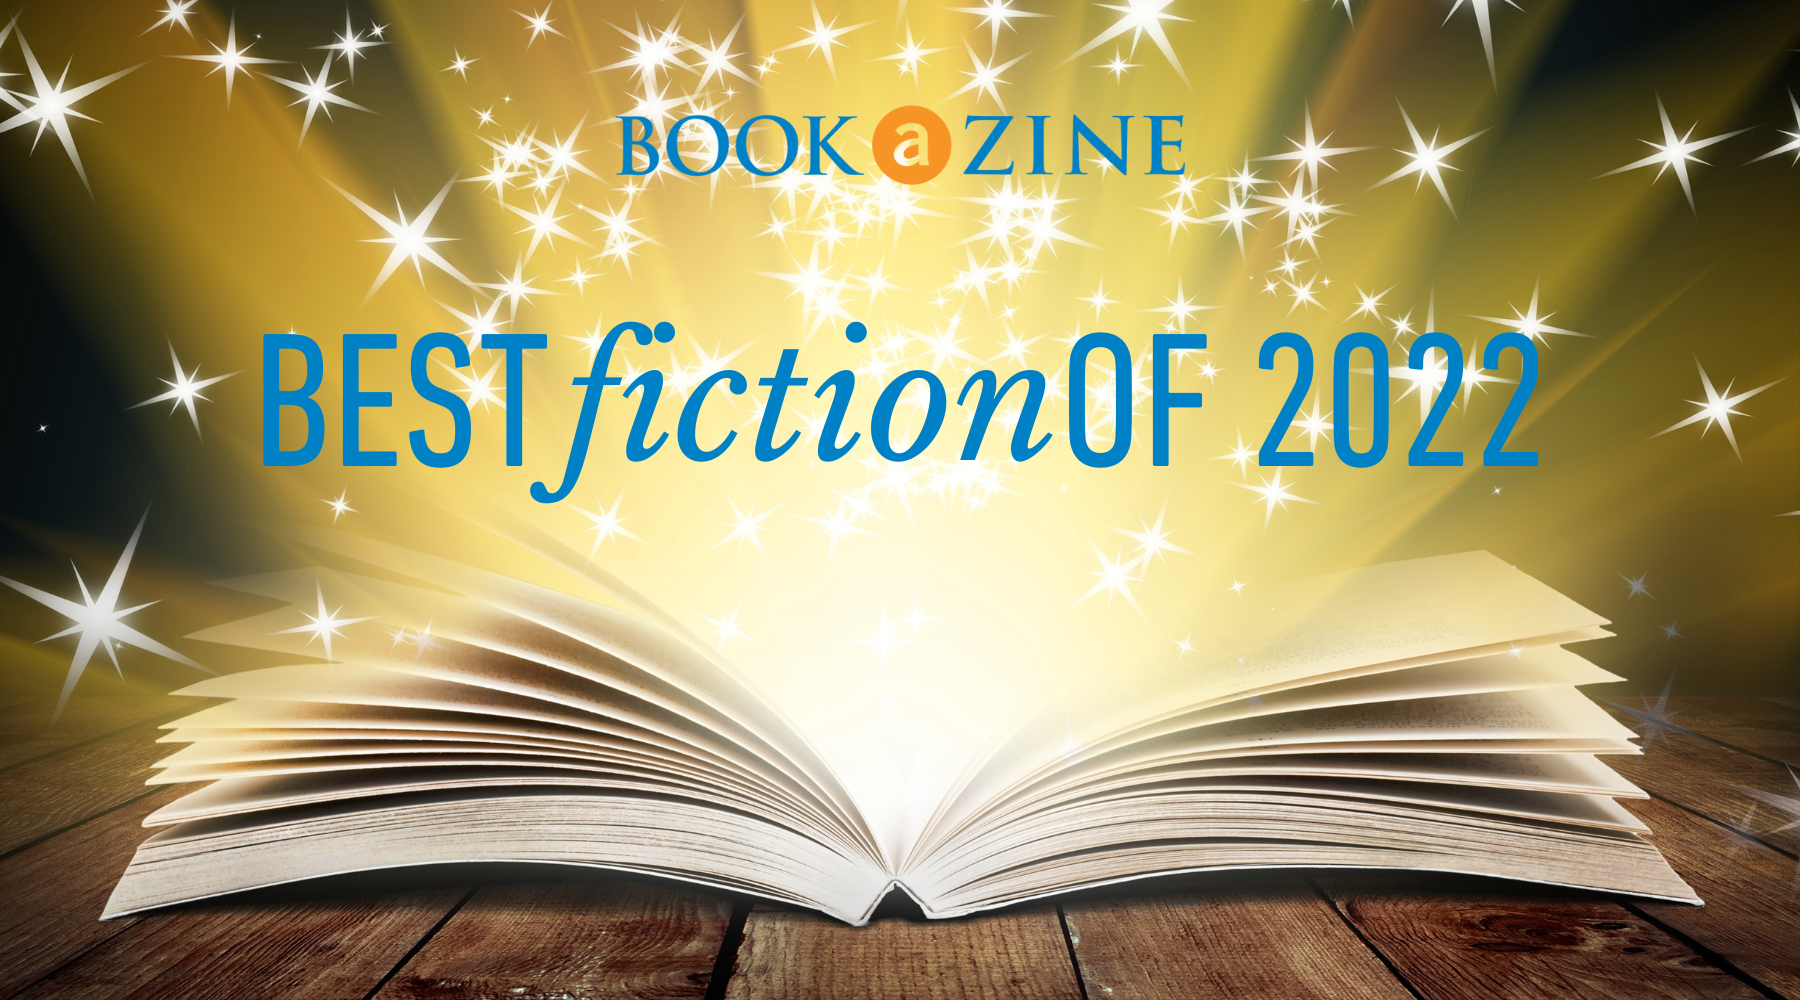 Best Fiction Books of 2022